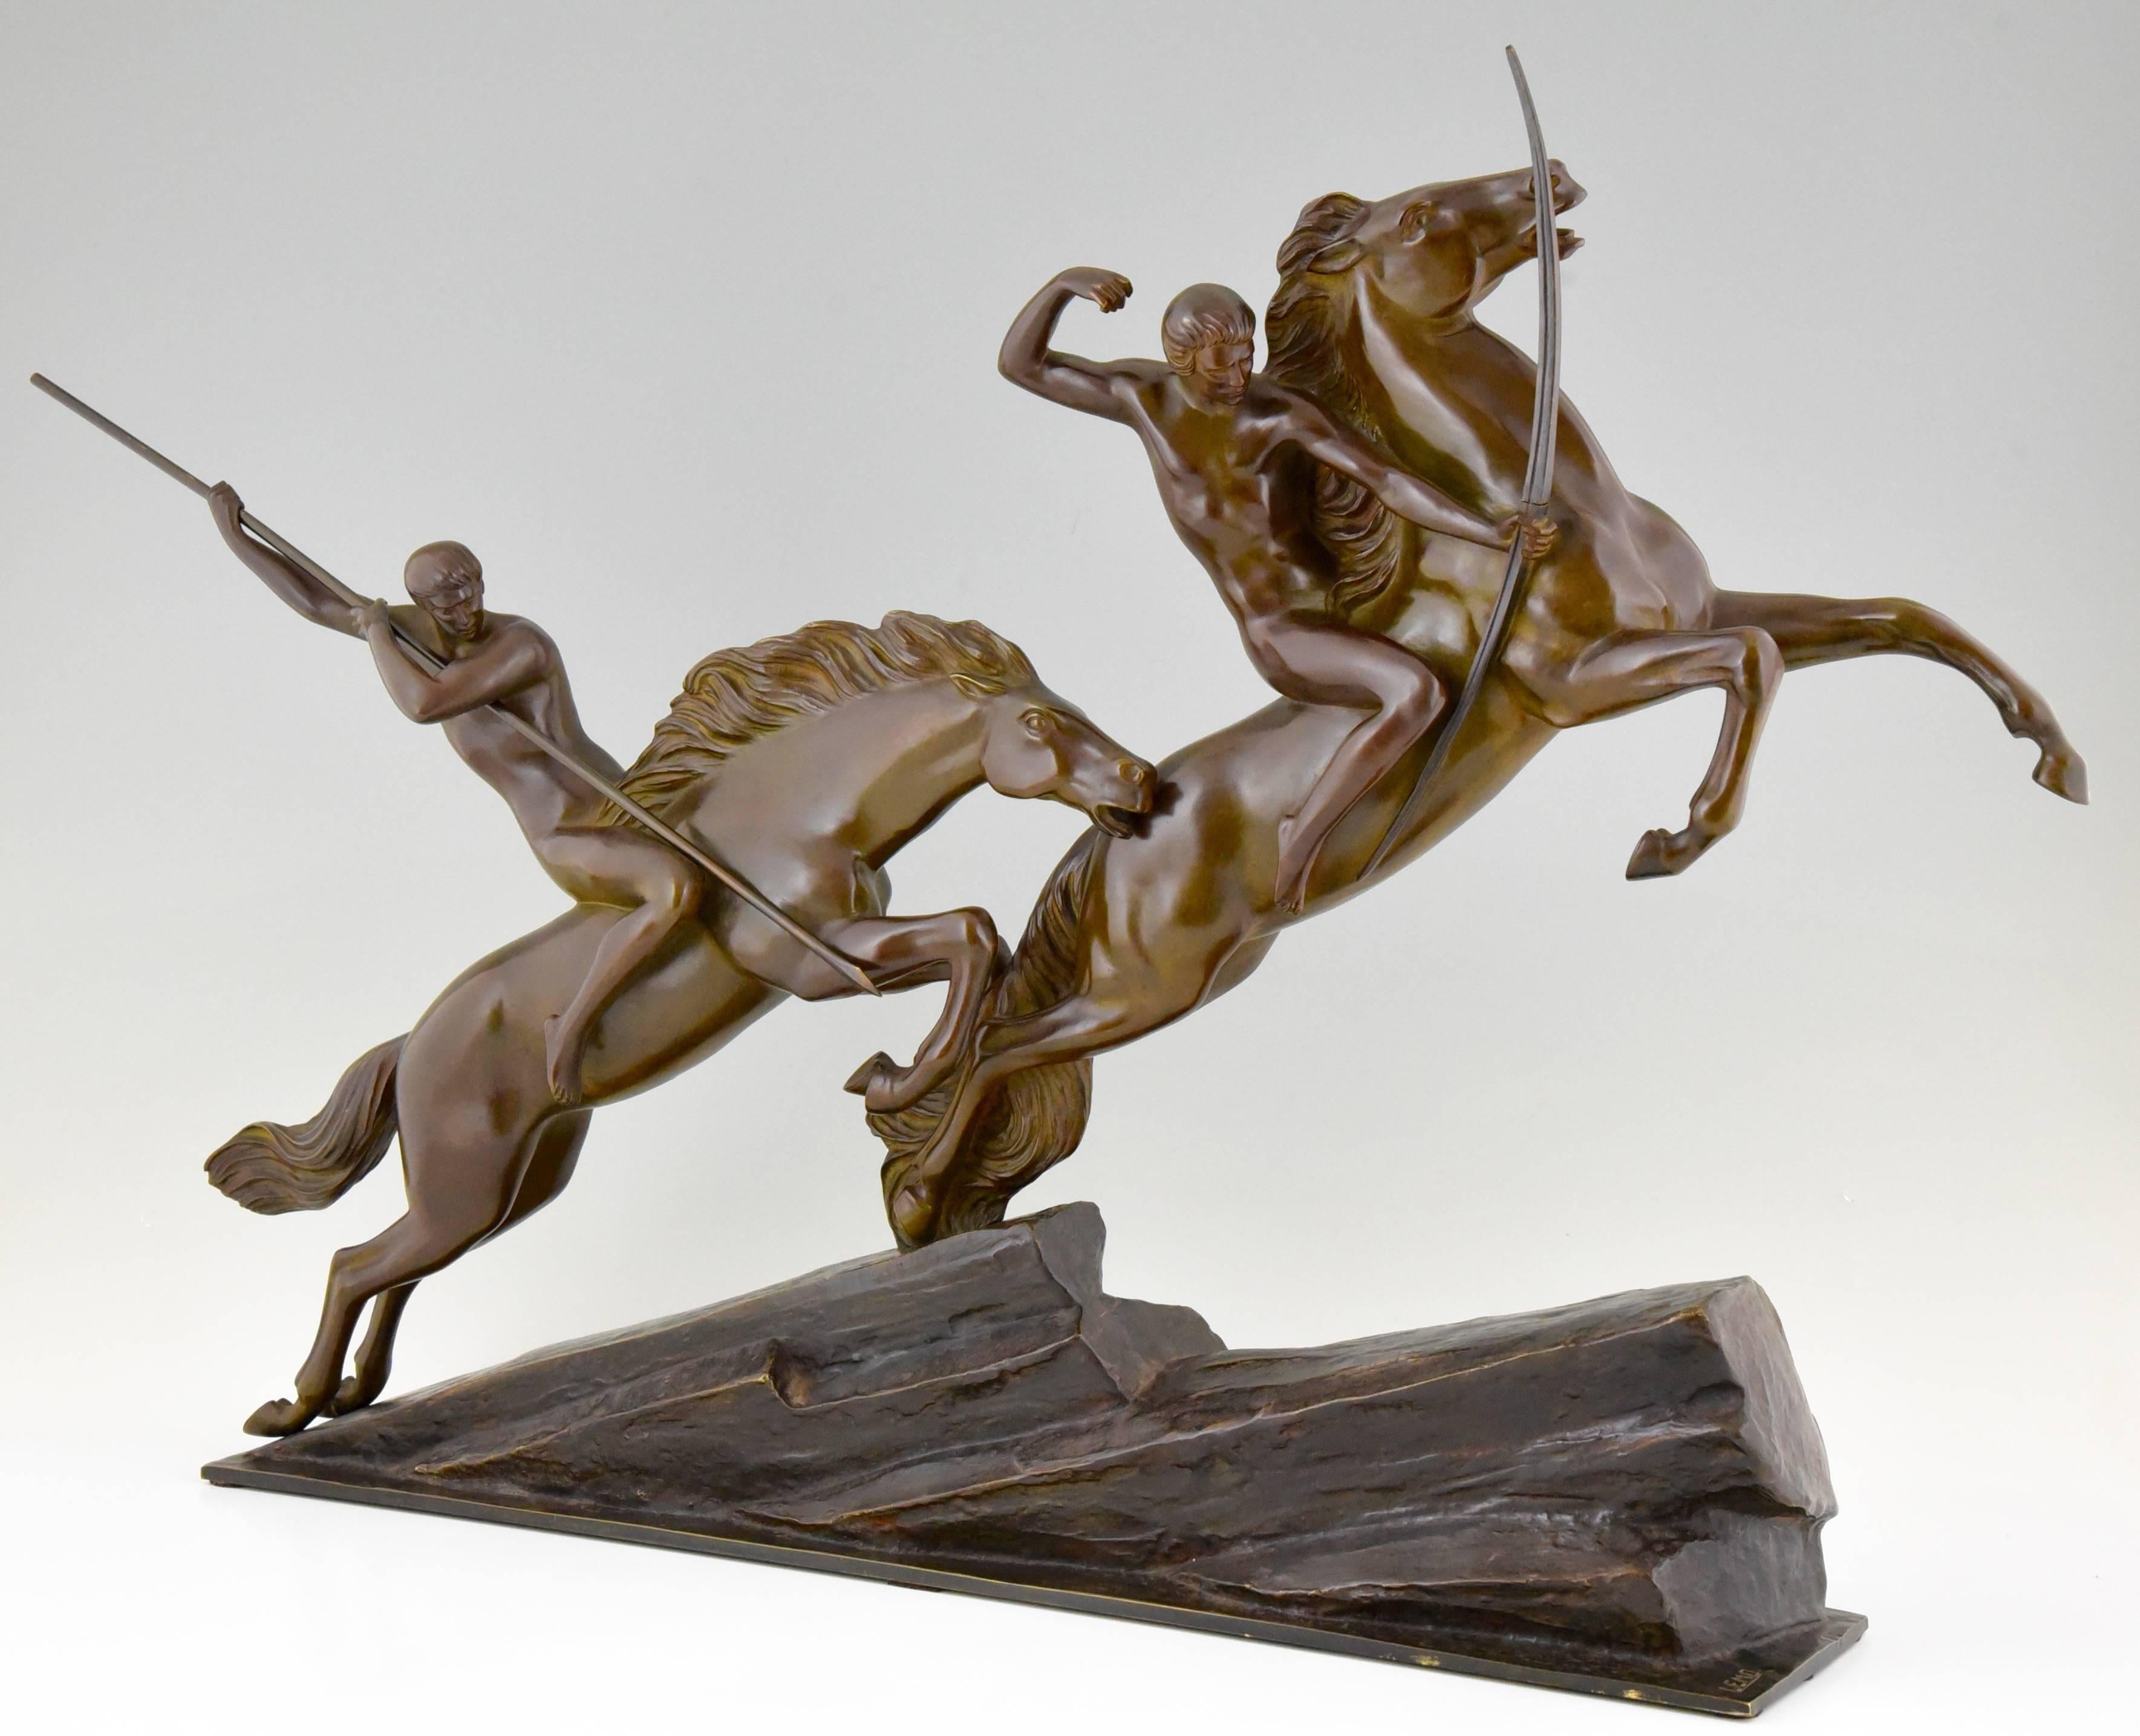 Impressive Art Deco bronze sculpture of two archers with bow and spear on a rearing horses.

Artist/maker: Armand Lemo.
Signature/marks: Lemo, stamped number.
Style: Art Deco.
Date: 1925.
Material: Bronze.
Origin: France.
Size: H 60 cm x L